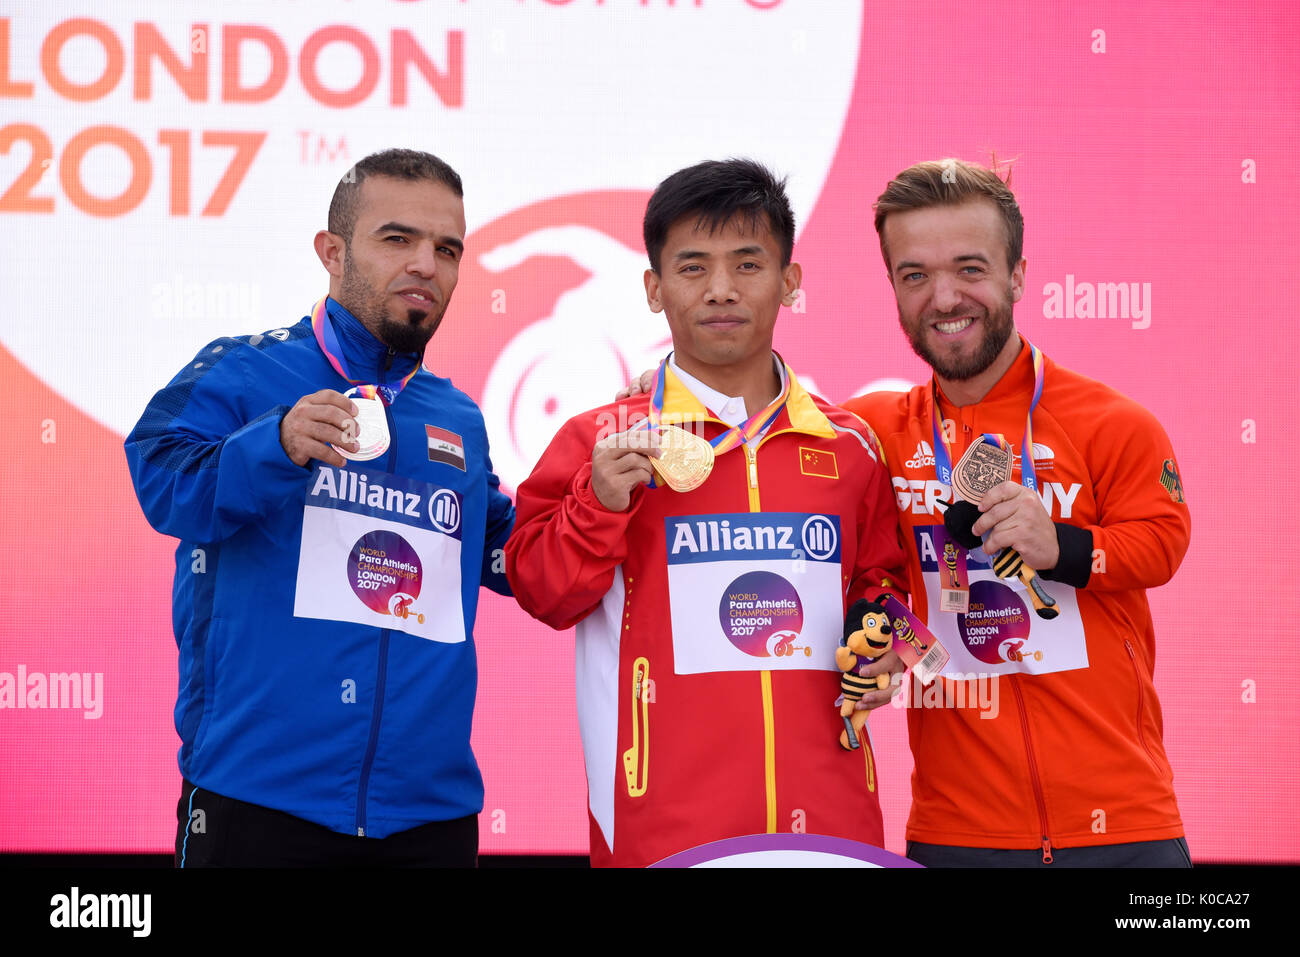 Pengxiang Sun, Wildan Nukhailawi, Mathias Mester medalists at the medal ceremony for the F41 javelin at the World Para Athletics Championships, London Stock Photo